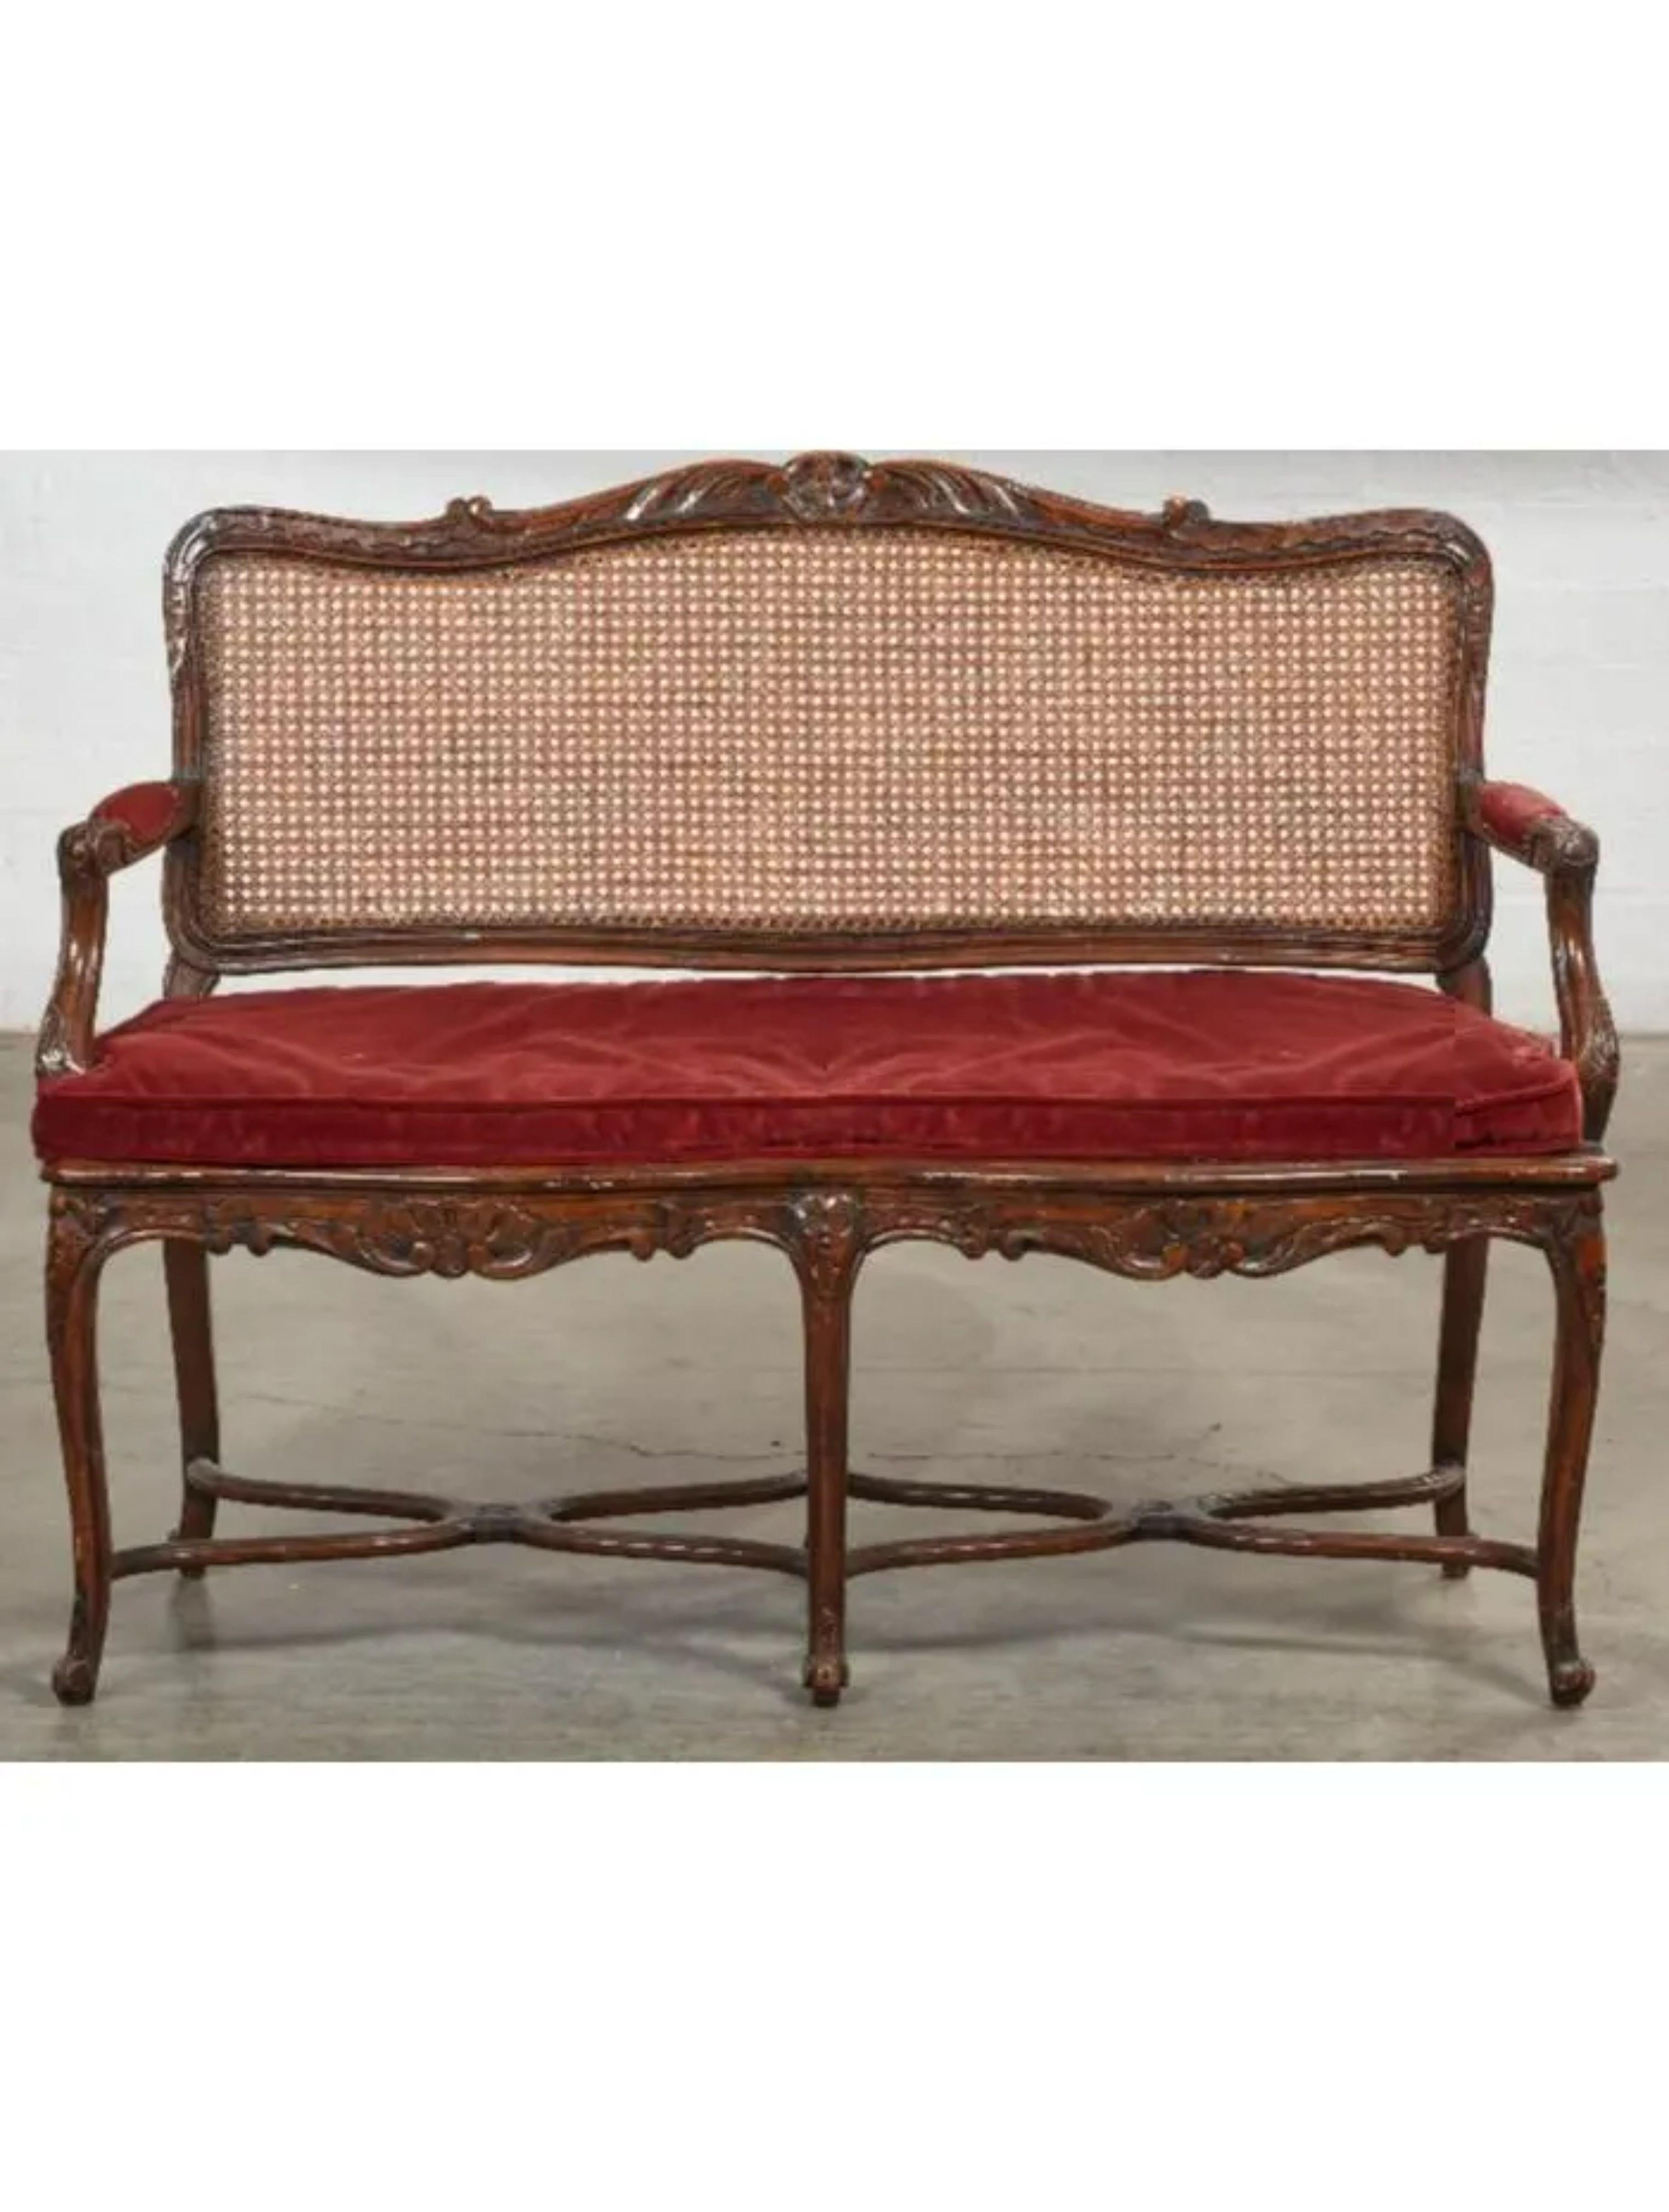 20th Century Louis XV Style French Provincial Carved Walnut & Cane Seat Settee